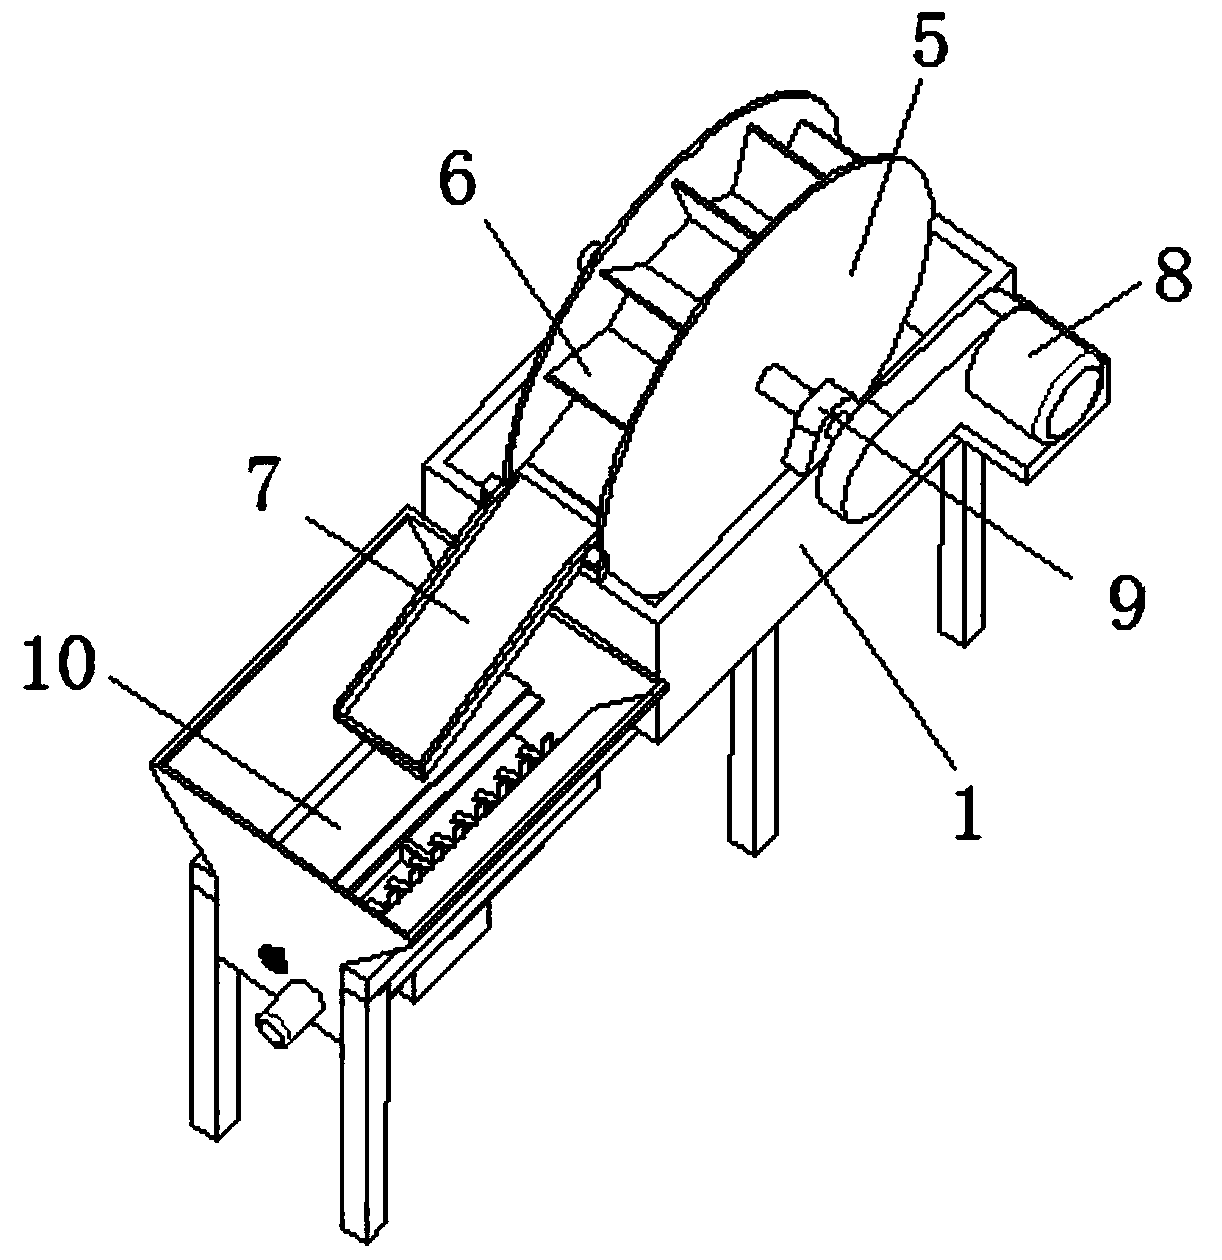 Pepper powder spraying device for producing spicy noodles and use method thereof